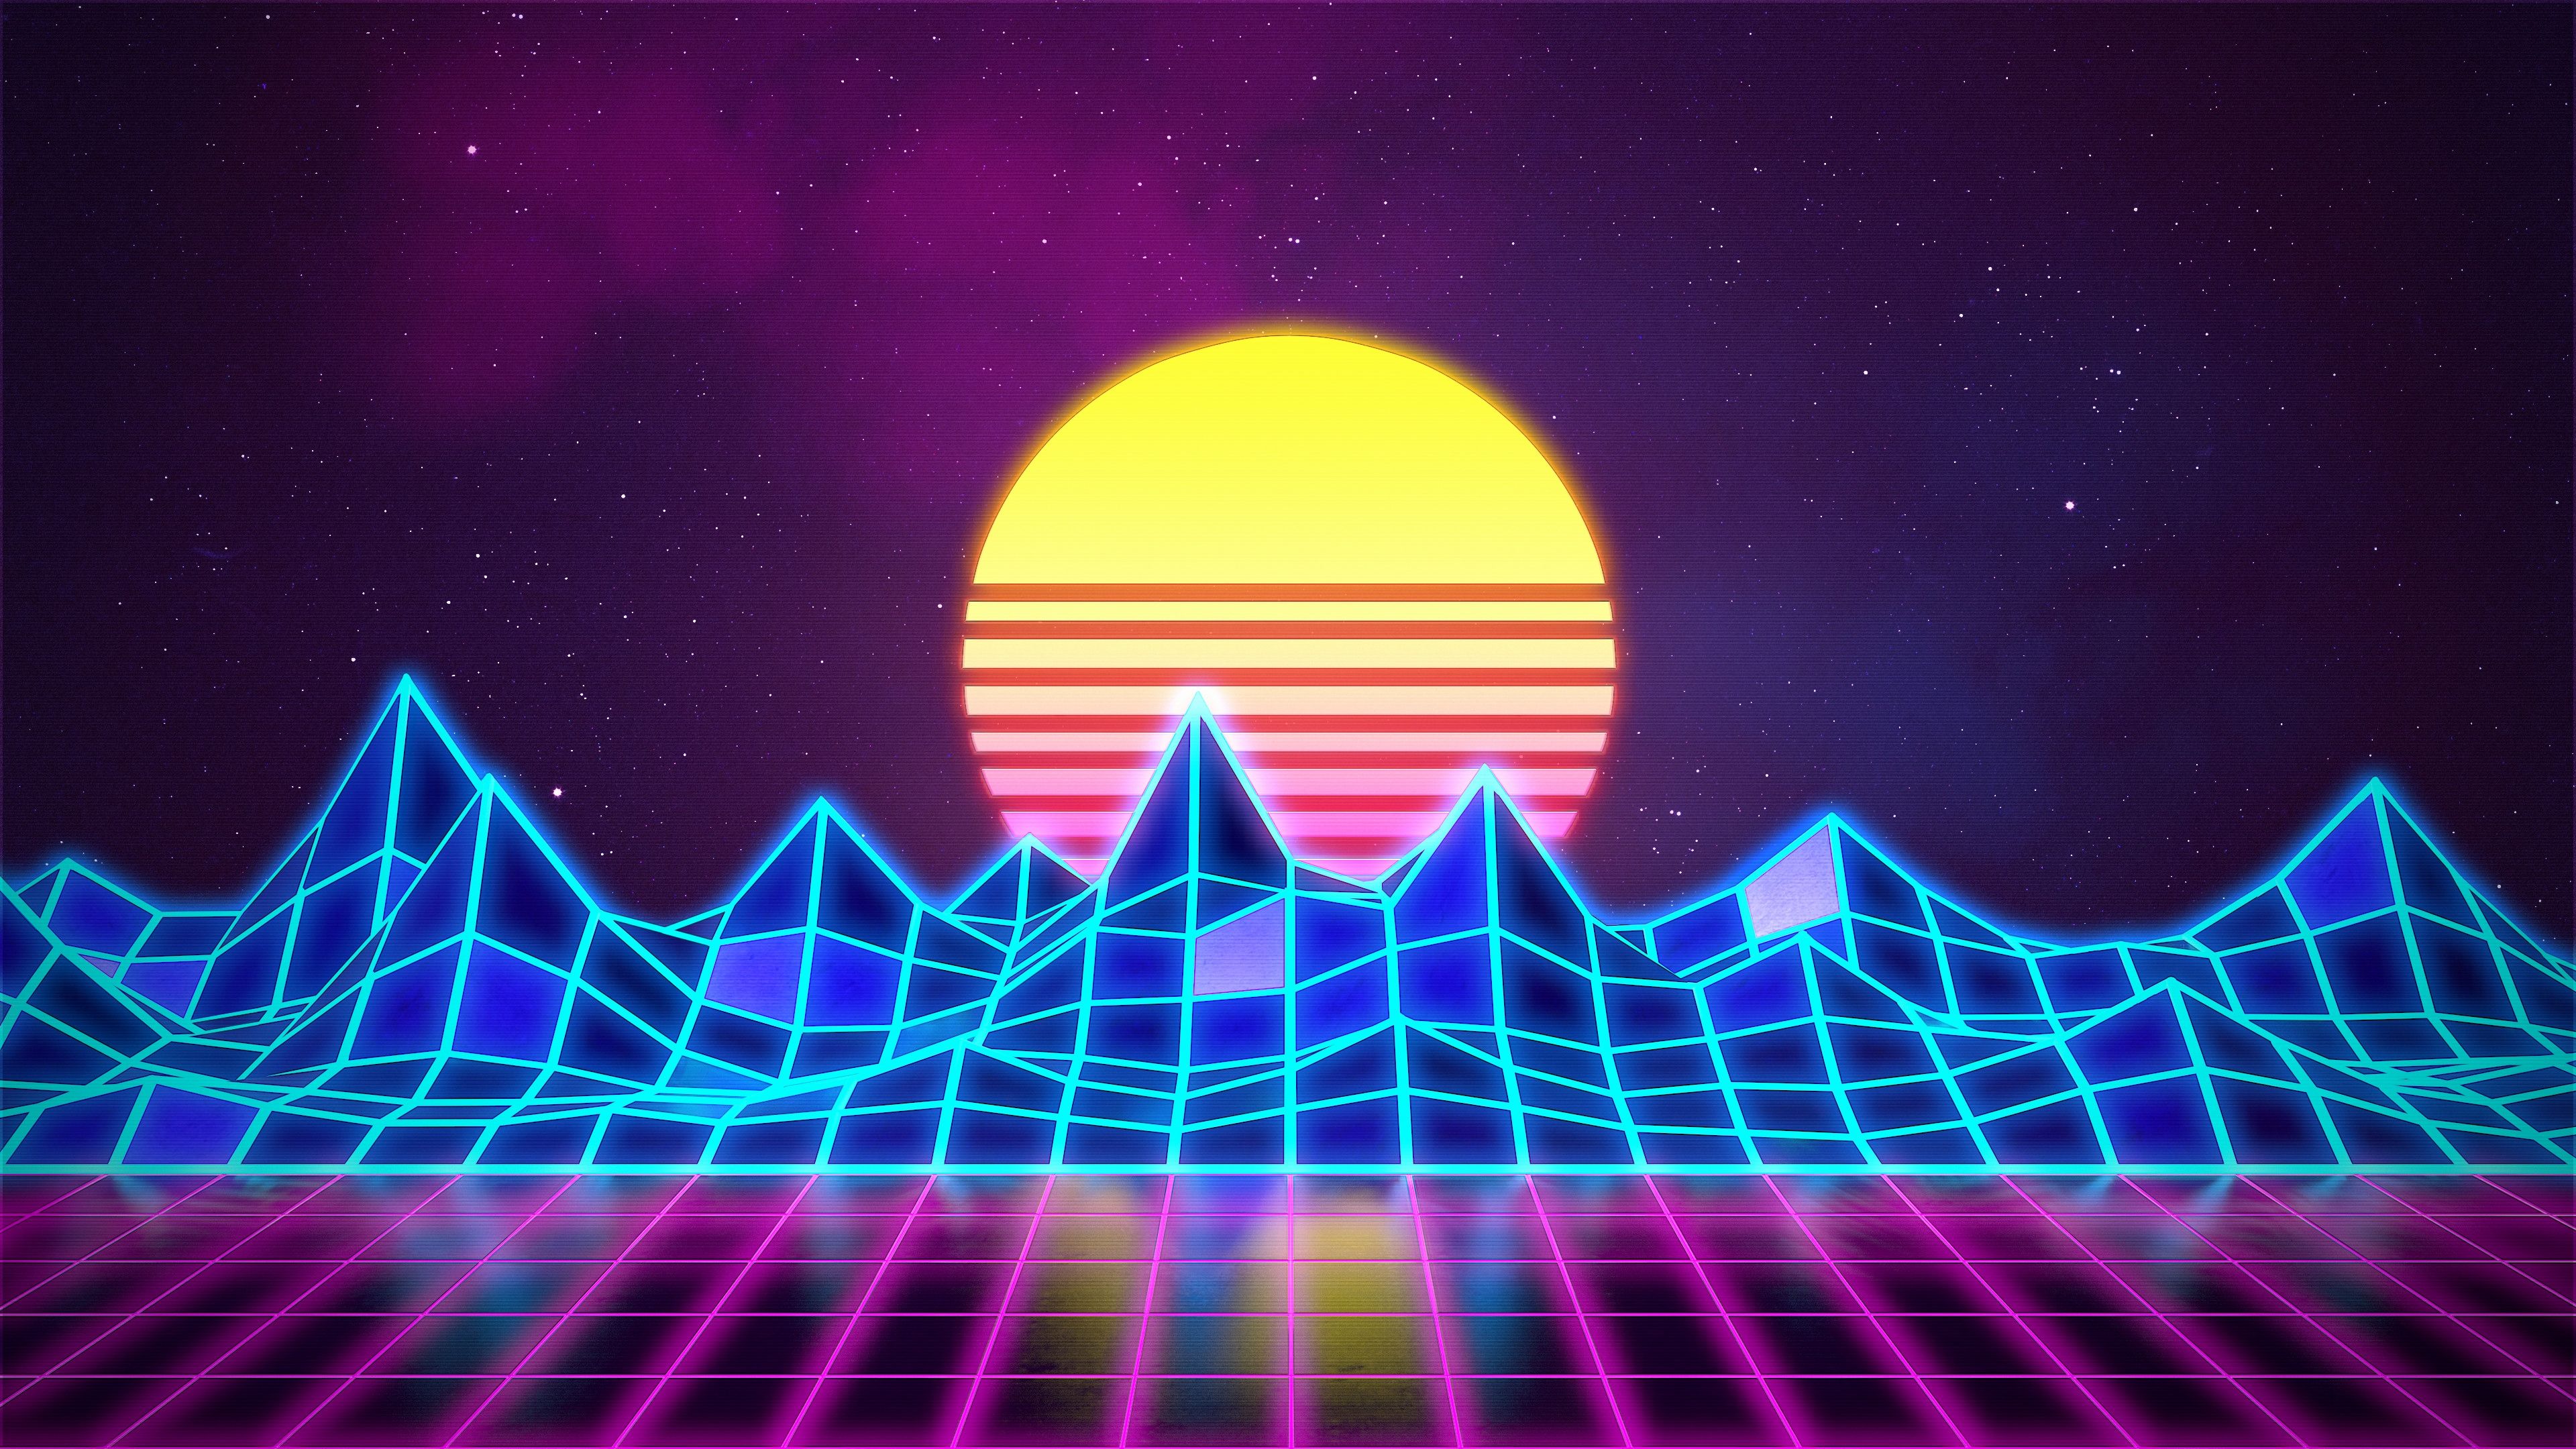 Retro Neon Background Beautiful Synthwave WallpaperDownload Free High Resolution Wallpaper for Desktop Puters and This Month of The Hudson